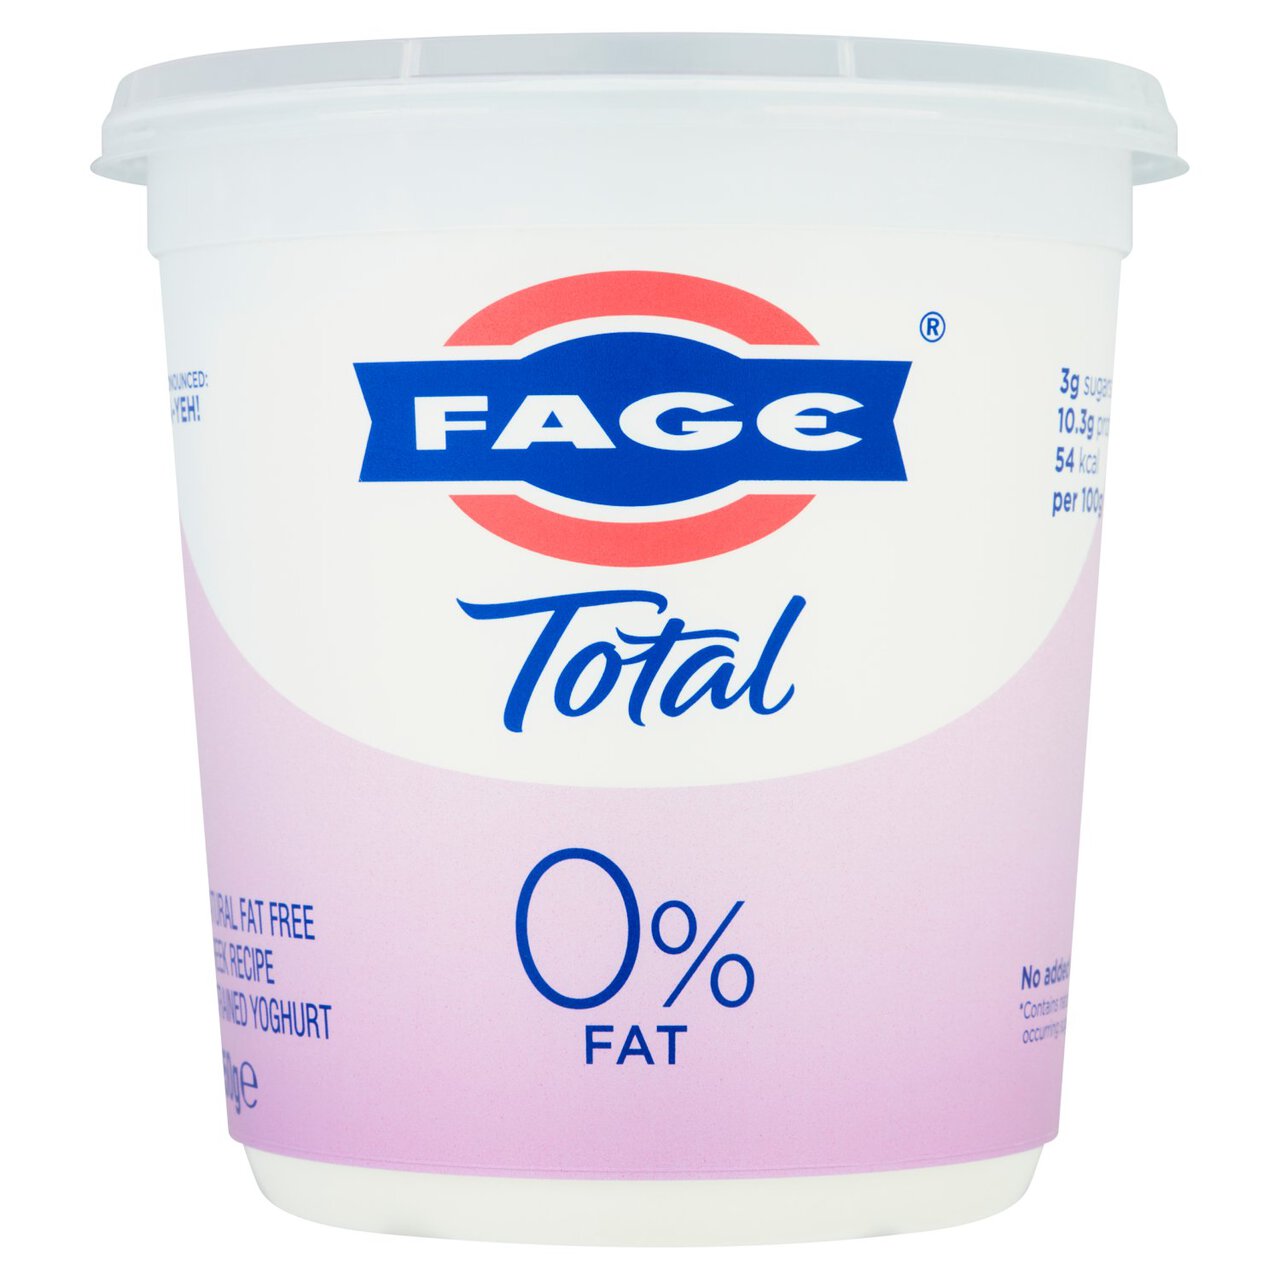 Fage Total 0% Fat Natural Fat Free Greek Recipe Strained Yoghurt 950g